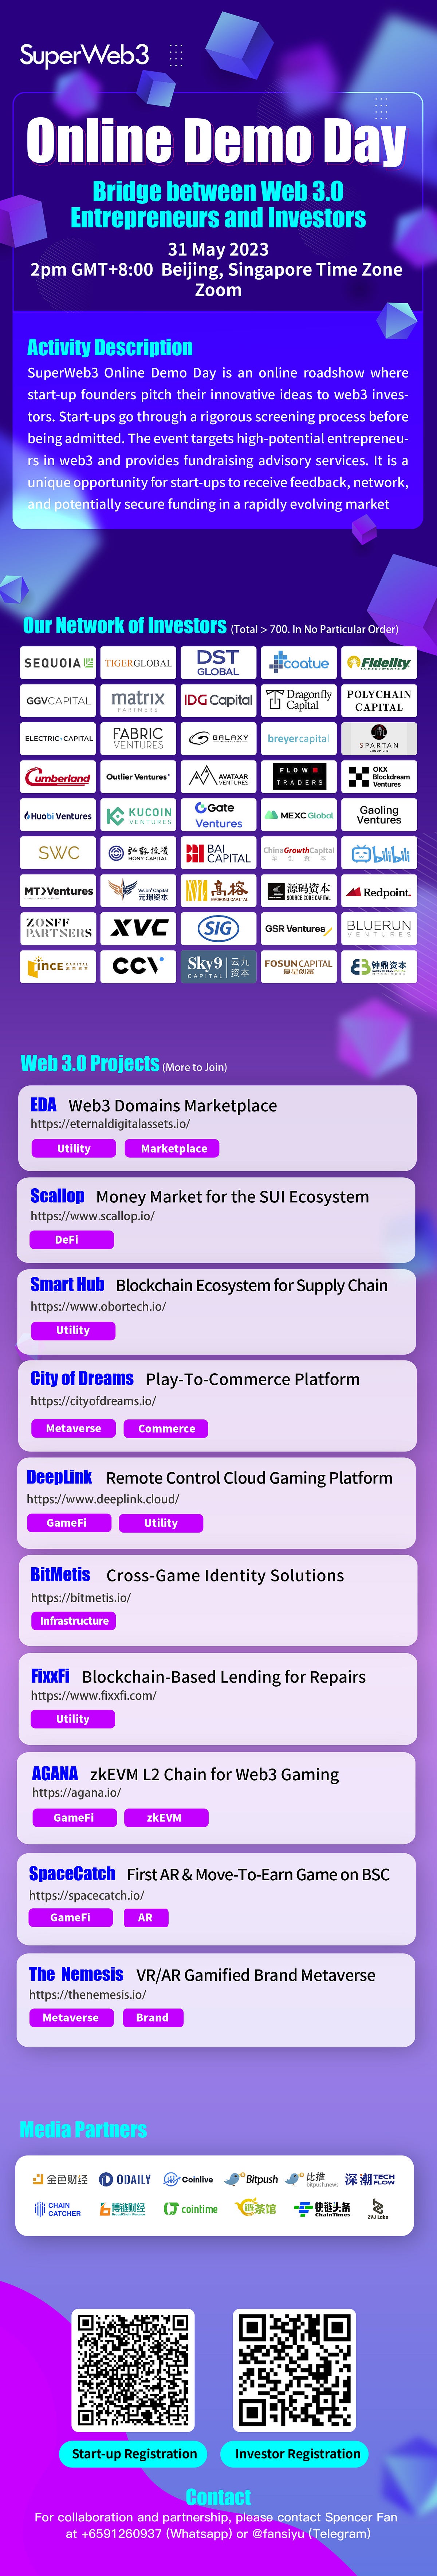 SuperWeb3 Online Demo Day on May 31th